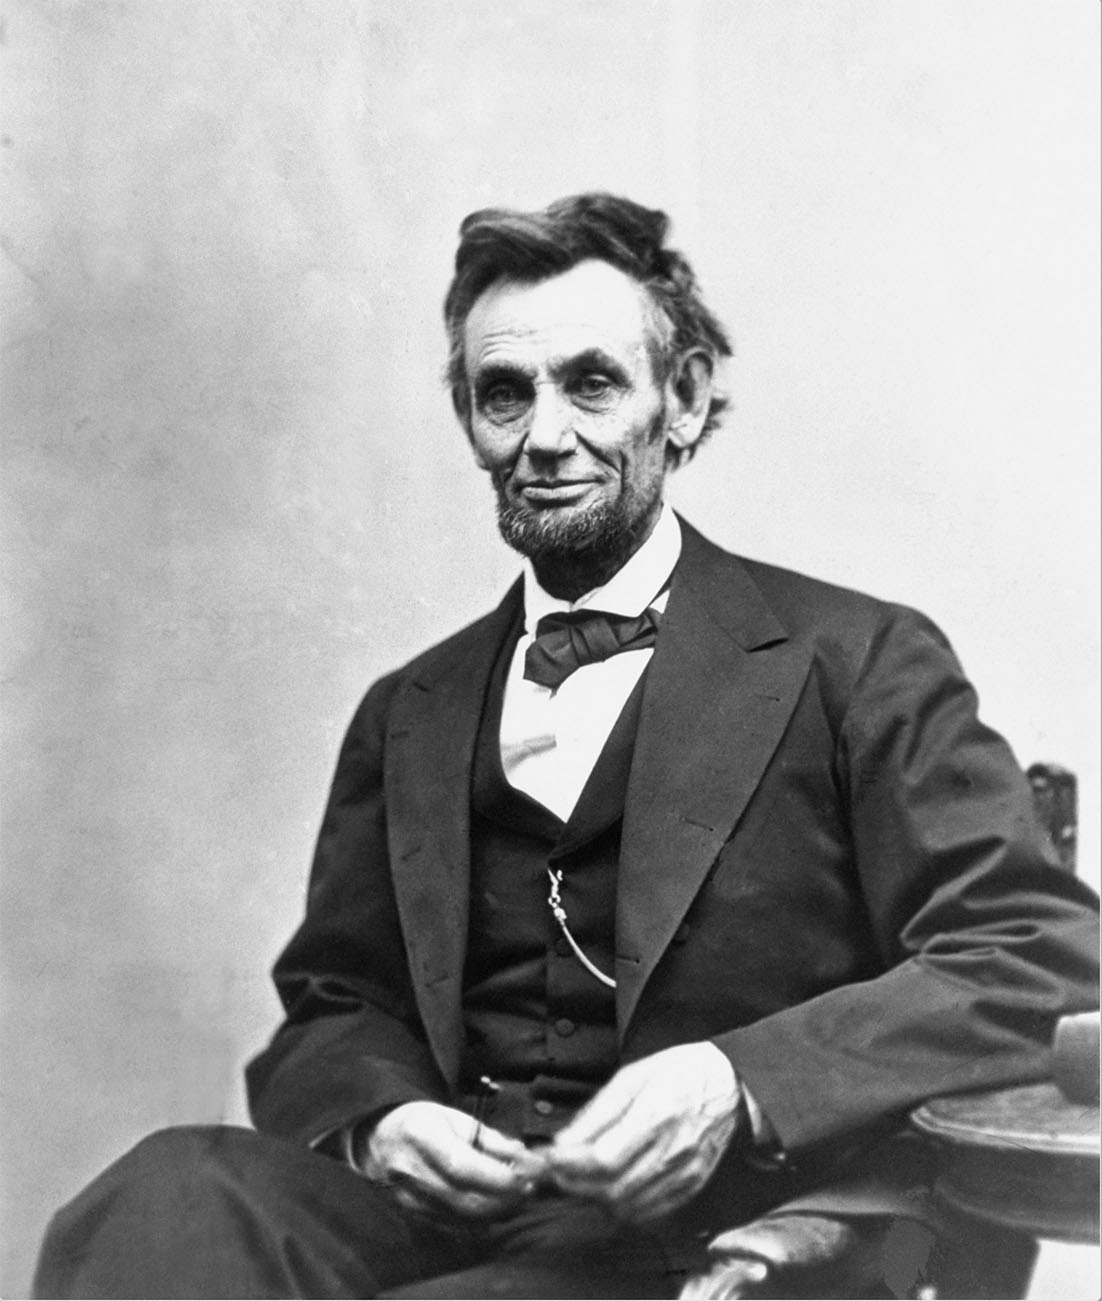 Colorize Filter- Lincoln in Black and White